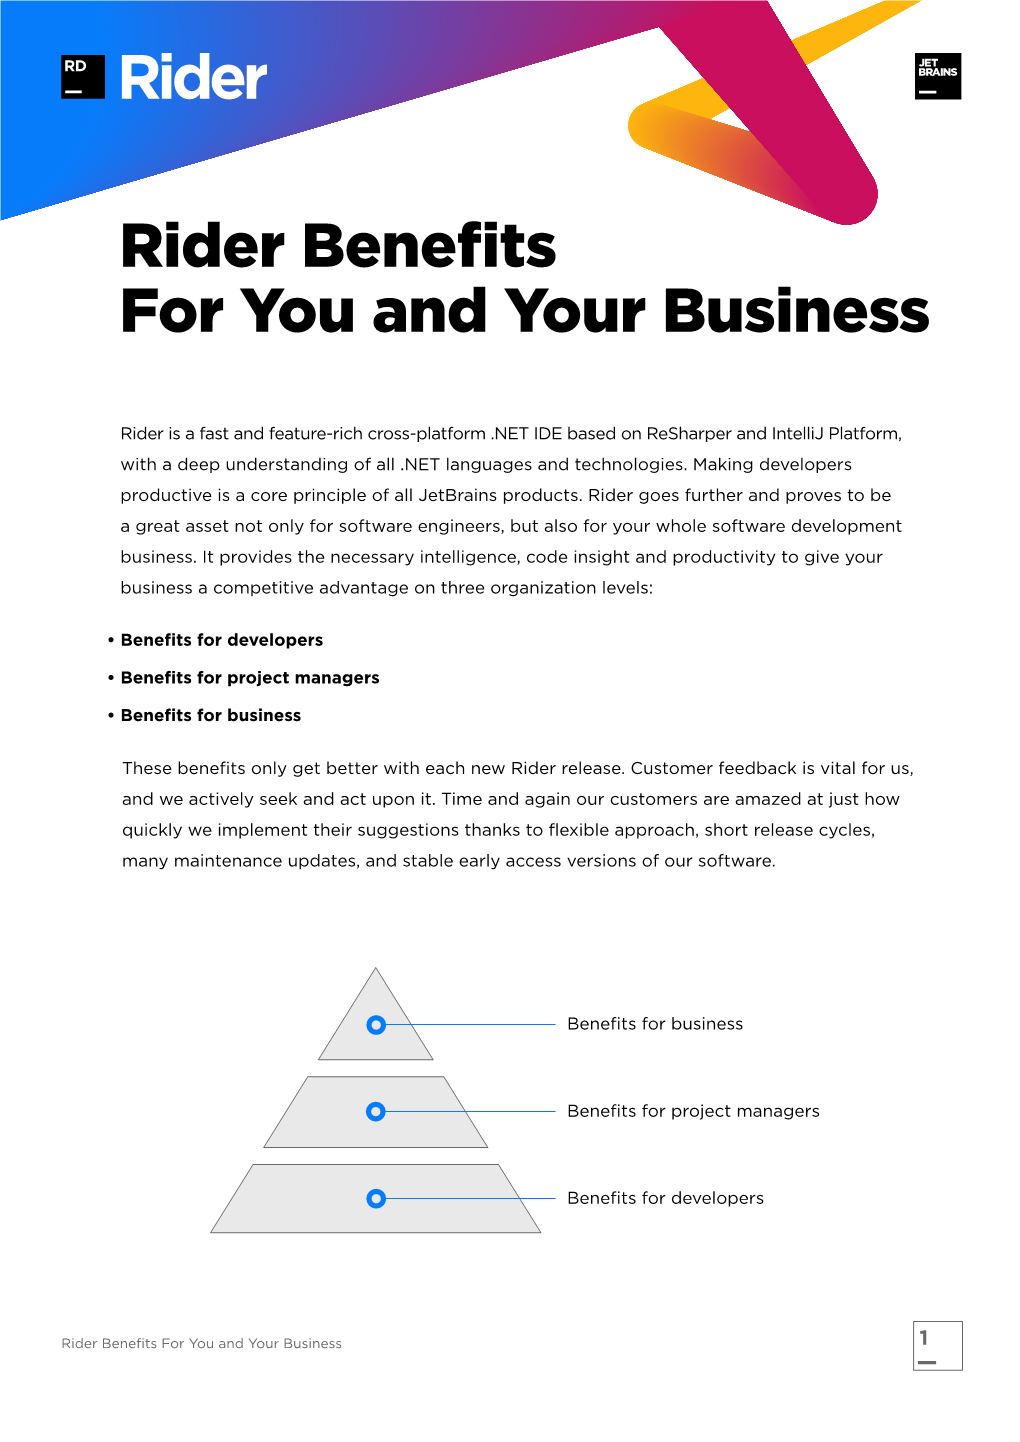 Rider Benefits for You and Your Business